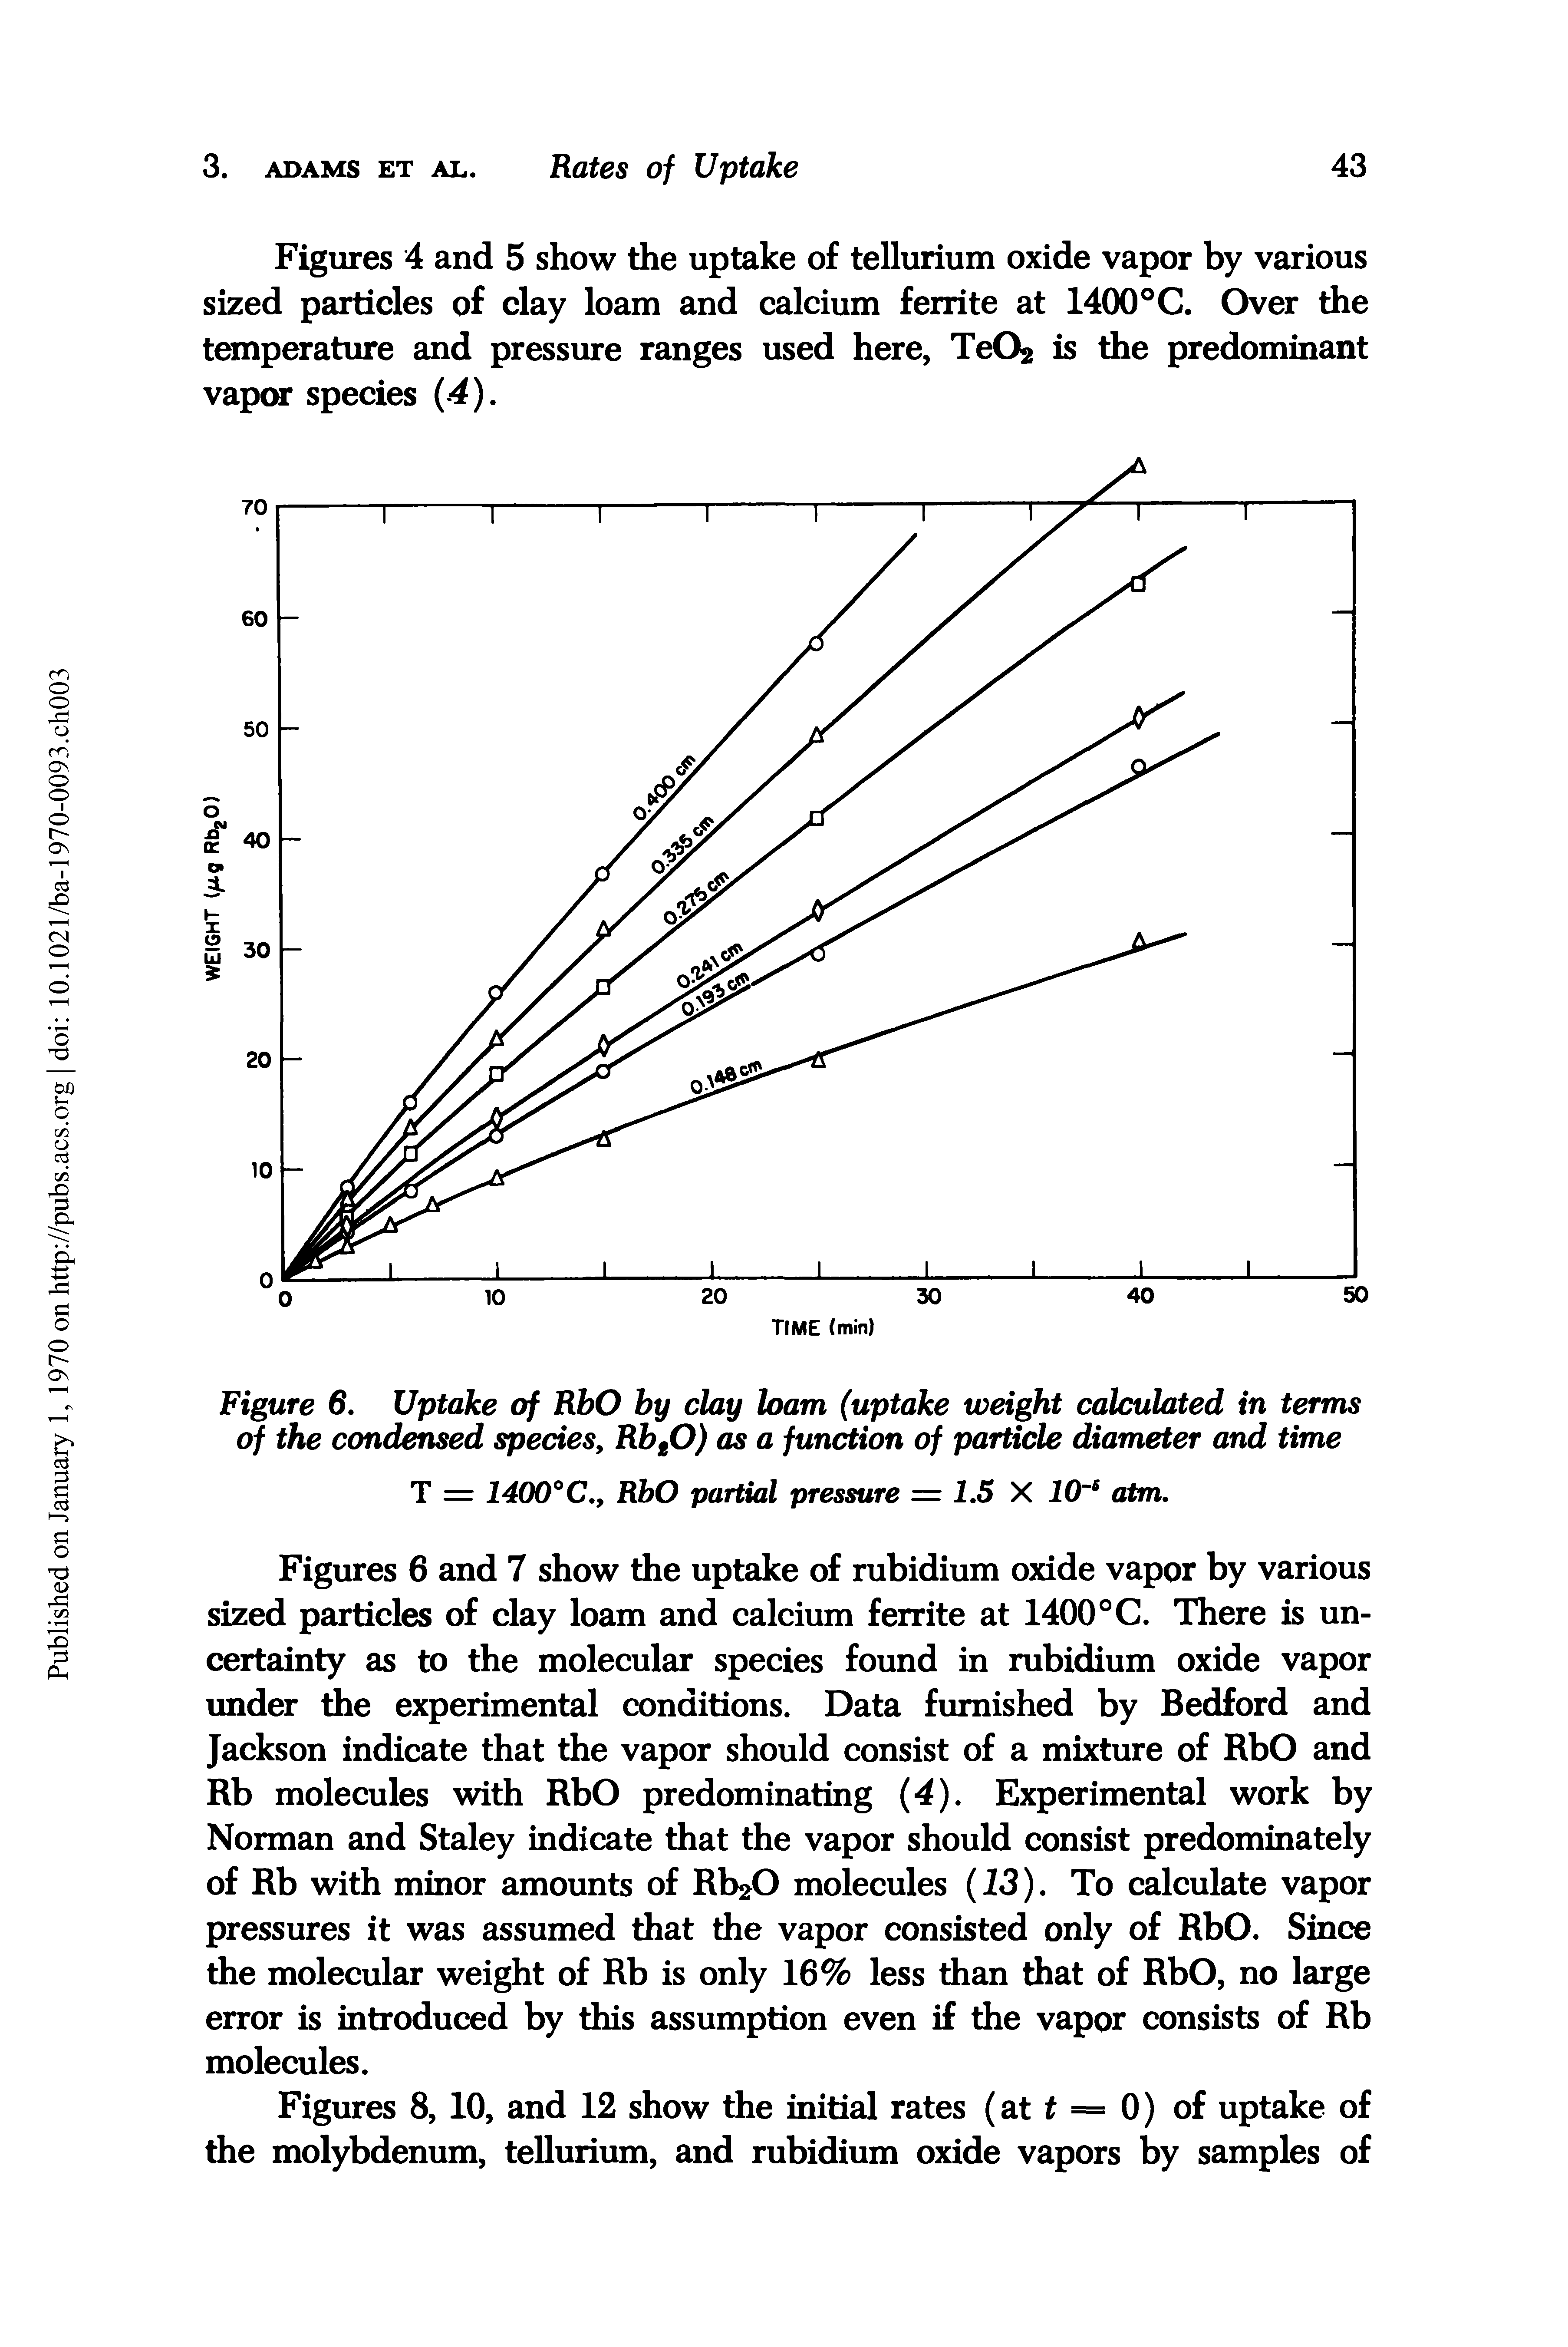 Figures 4 and 5 show the uptake of tellurium oxide vapor by various sized particles of clay loam and calcium ferrite at 1400°C. Over the temperature and pressure ranges used here, Te02 is the predominant vapor species (4).